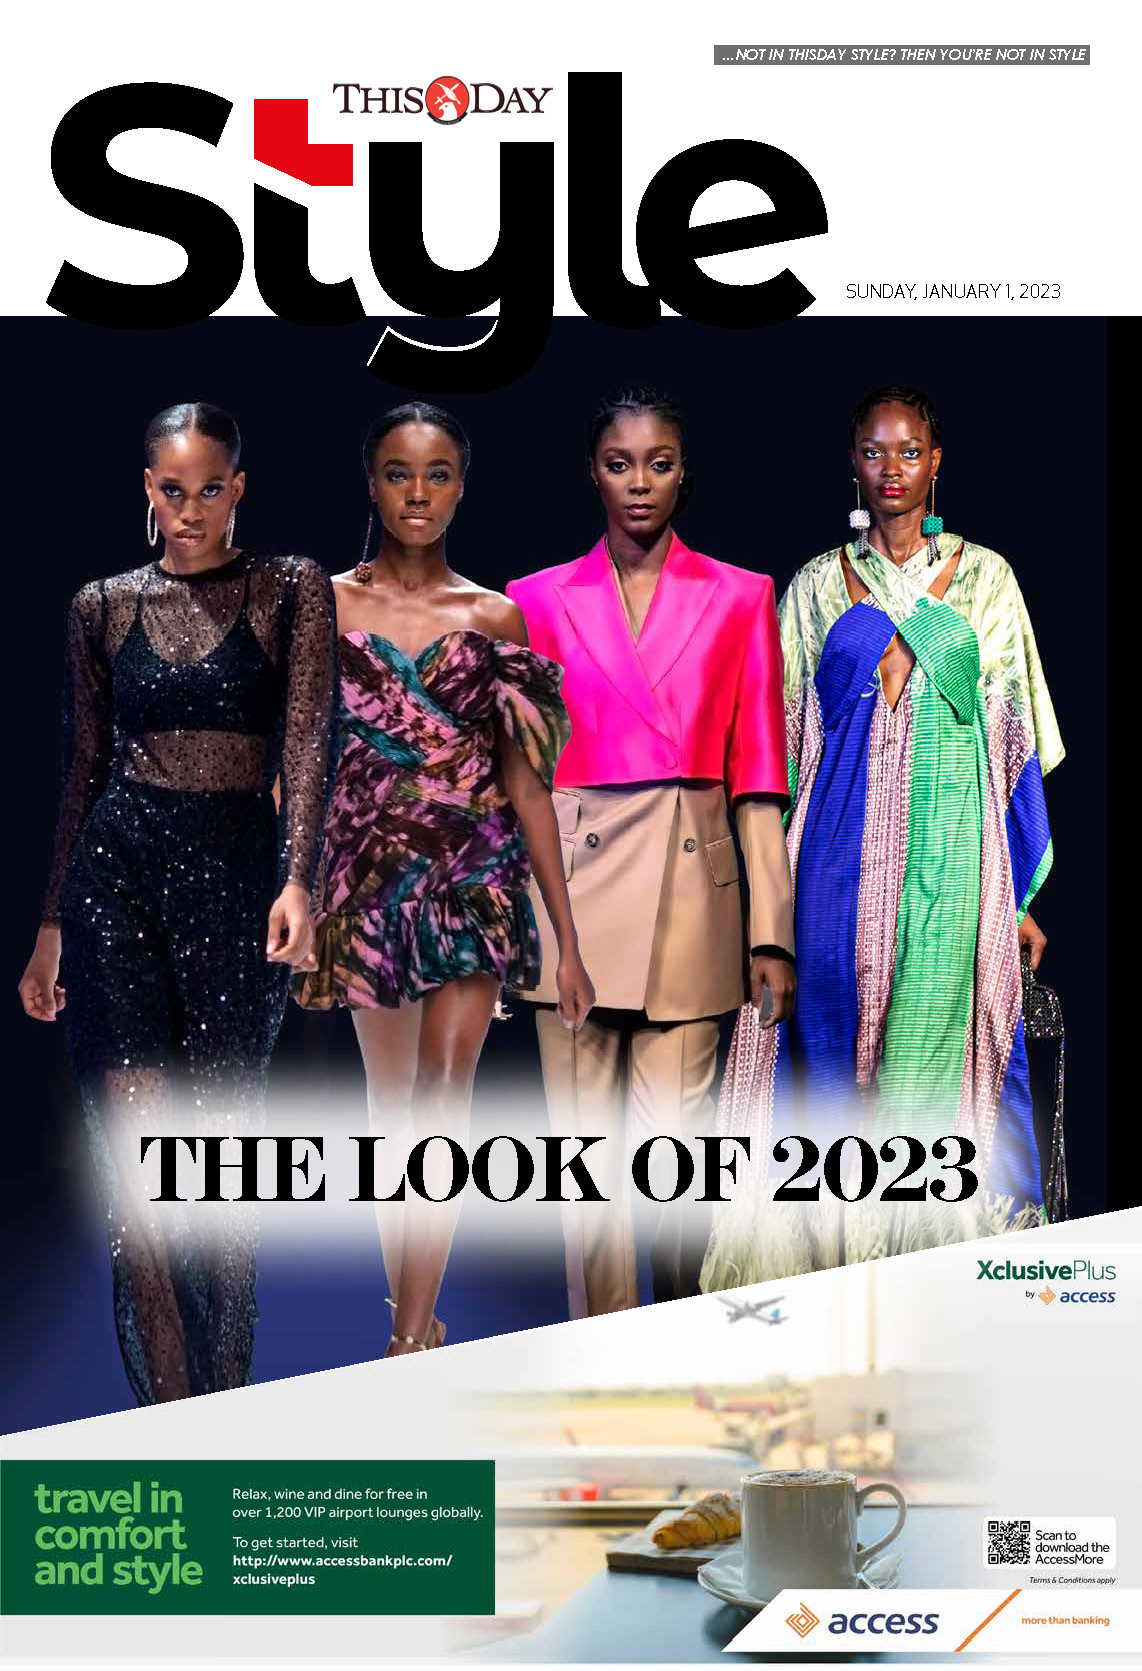 THISDAY STYLE MAGAZINE. JANUARY 1ST COVER.